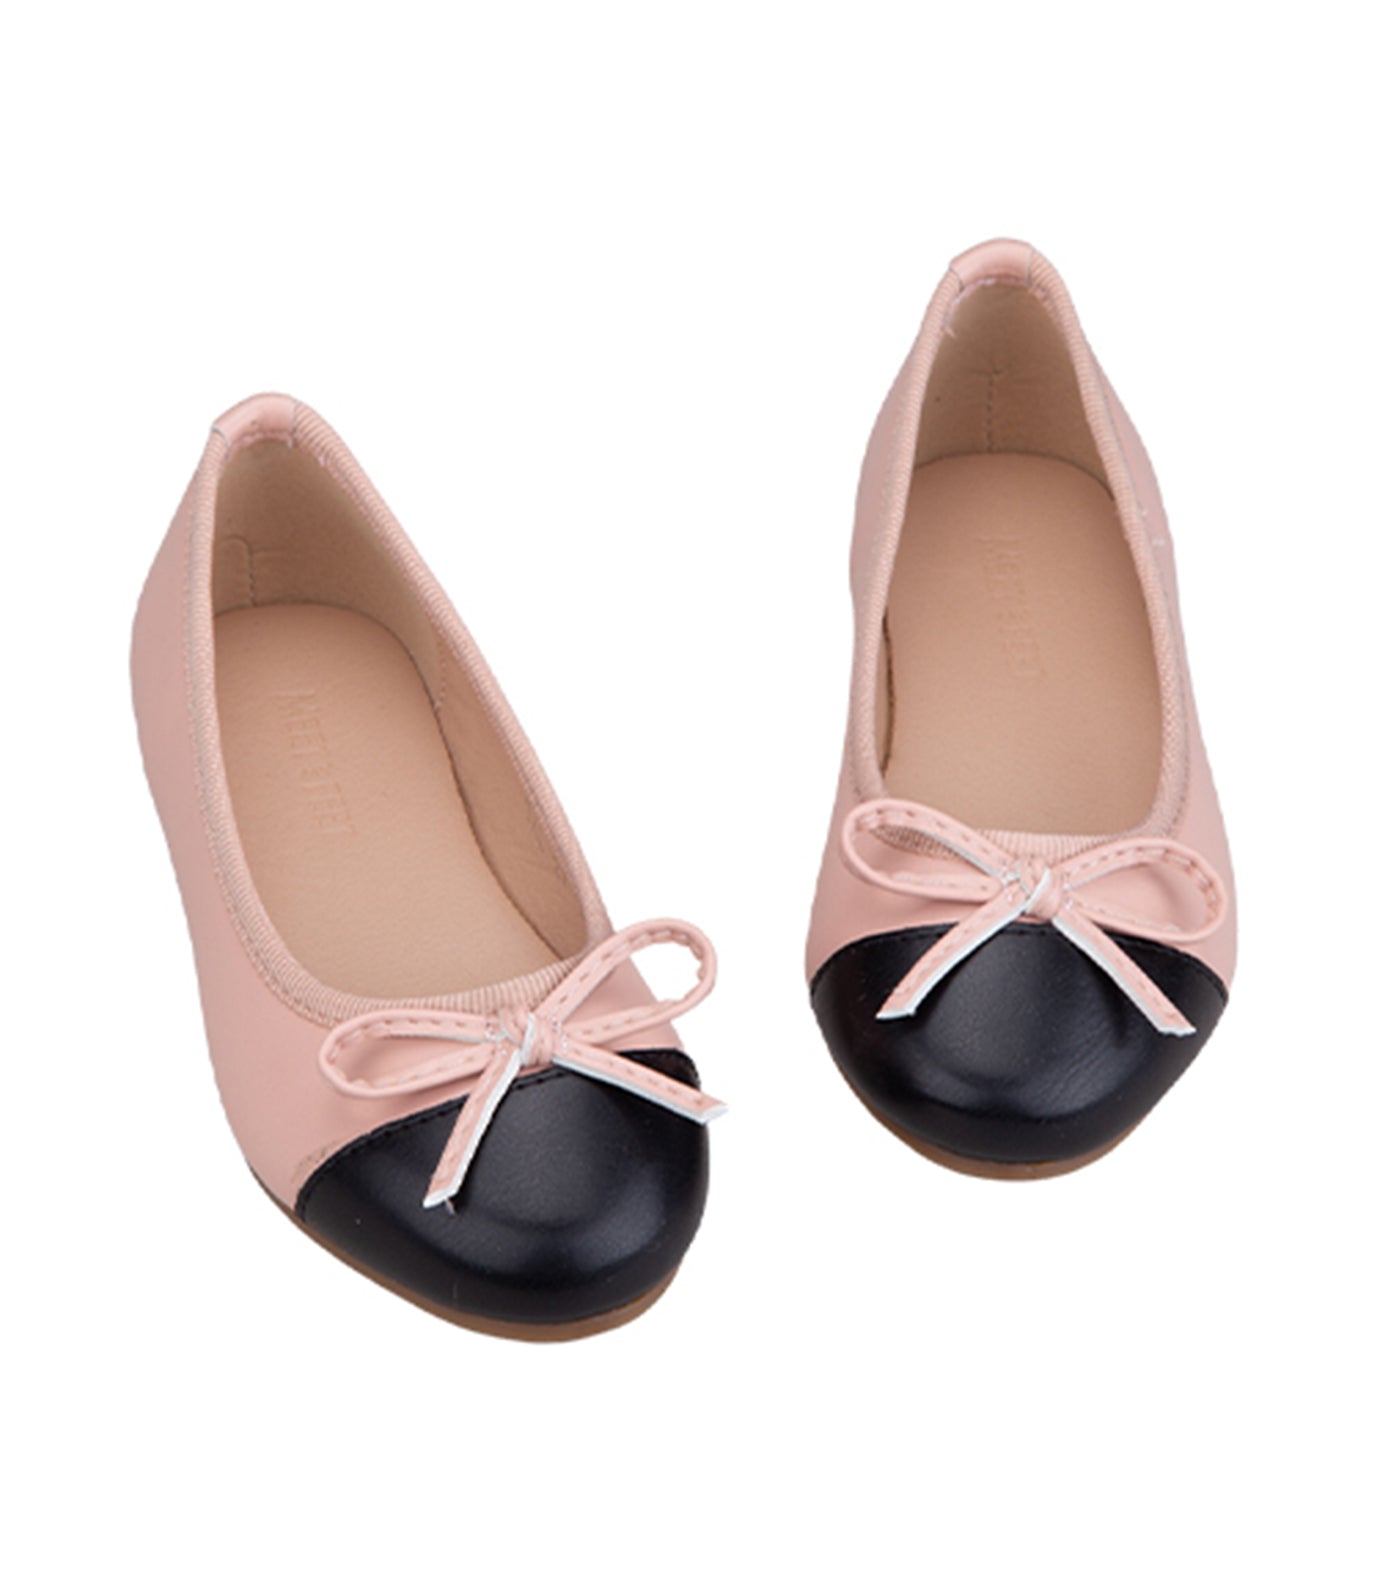 Tai Mary Janes for Toddlers and Kids - Pink and Black